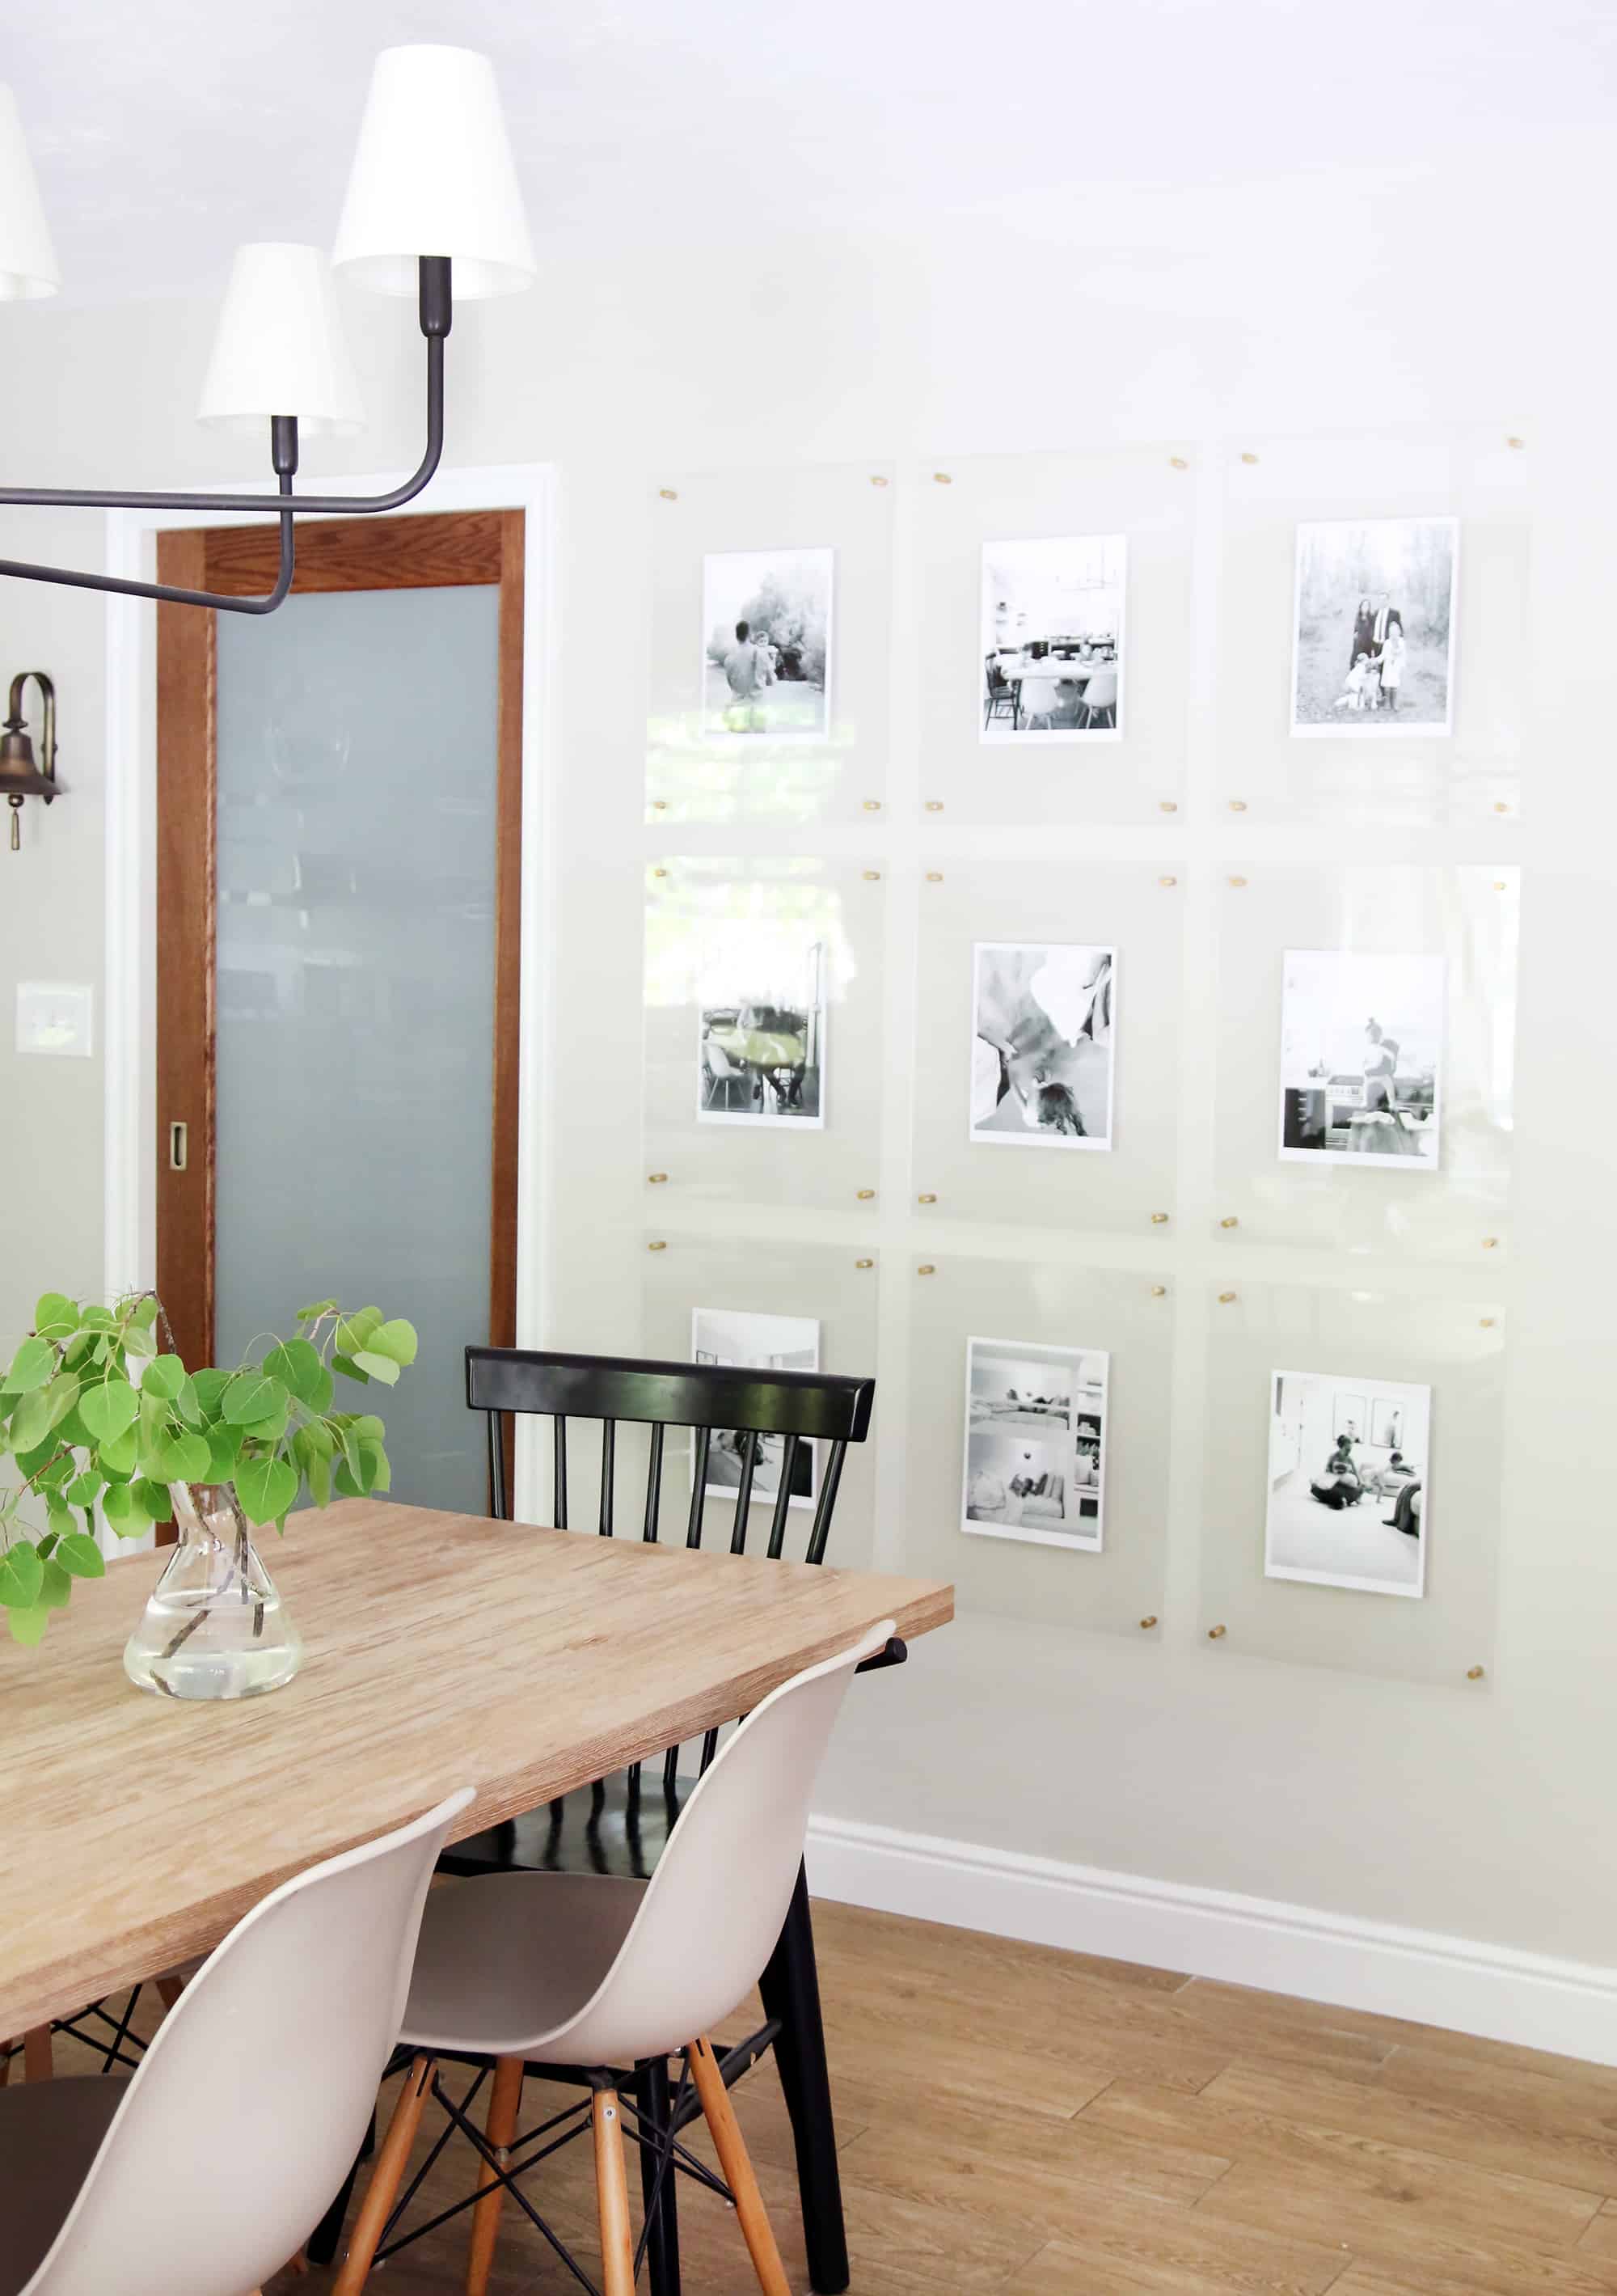 If you are wondering where to hang family photos in your home look at this amazing gallery wall in the dining room. This is a tasteful way to hang family photos on a gallery wall.